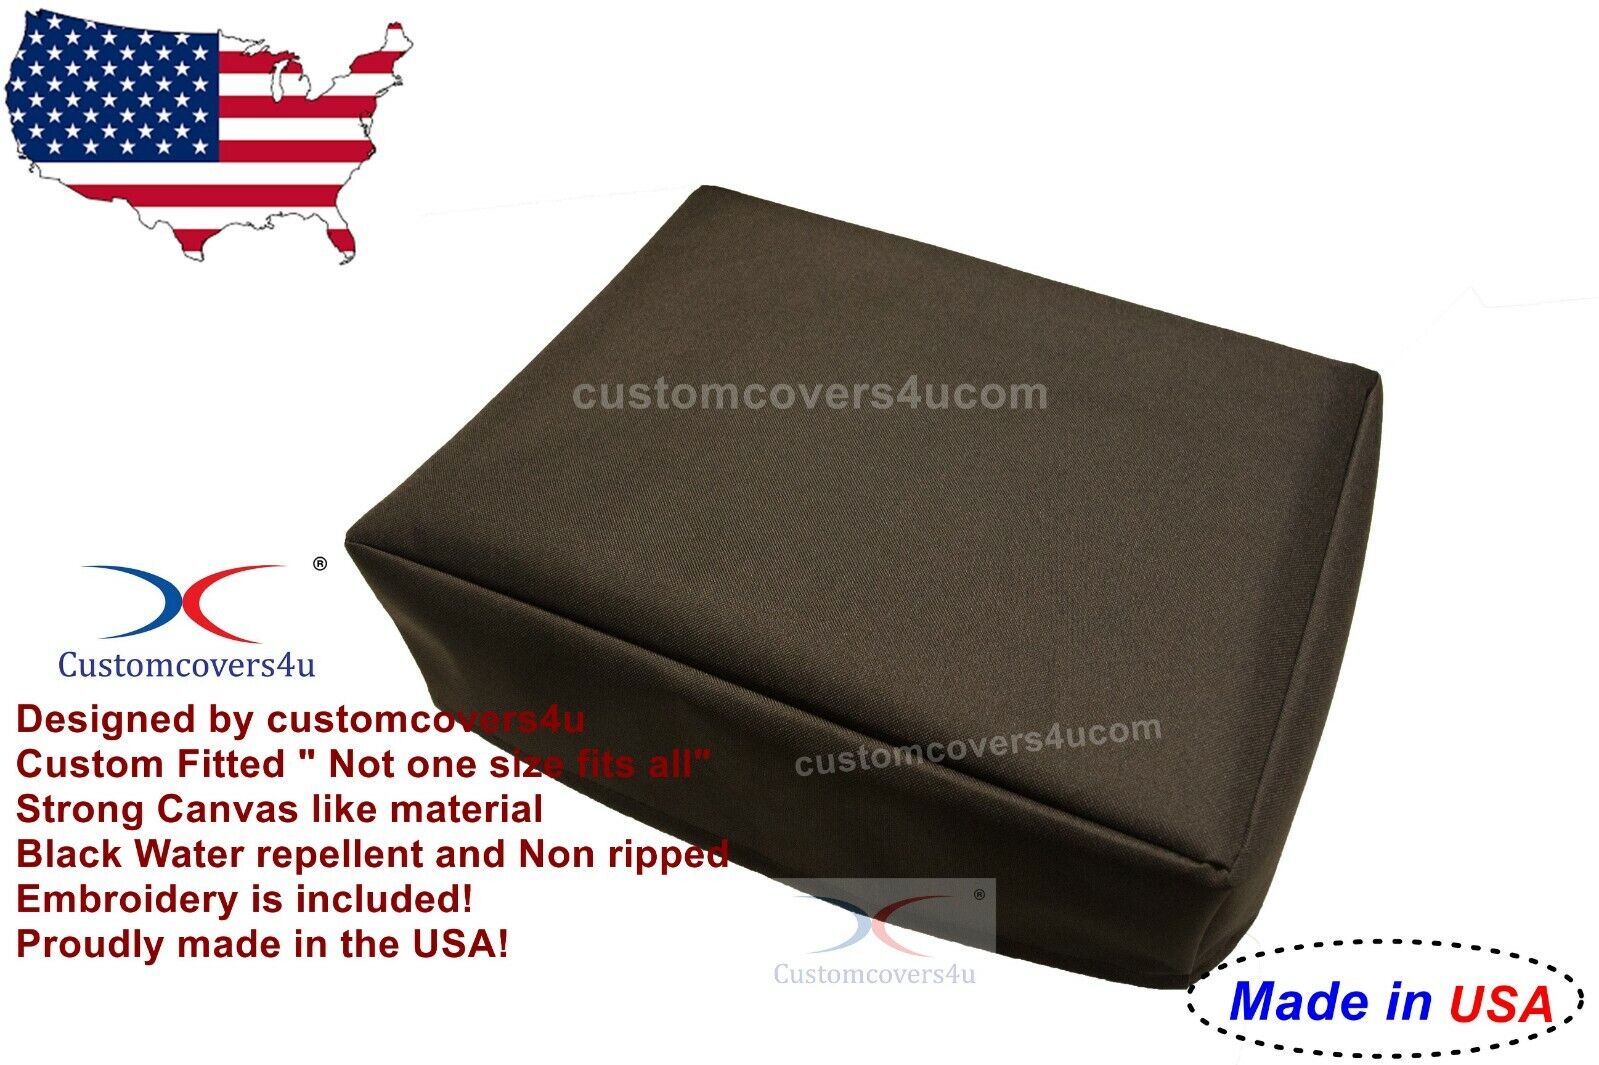 Dust Cover For Hasselblad Flextight X1 Scanner or X5 Color Black + EMBROIDERY 